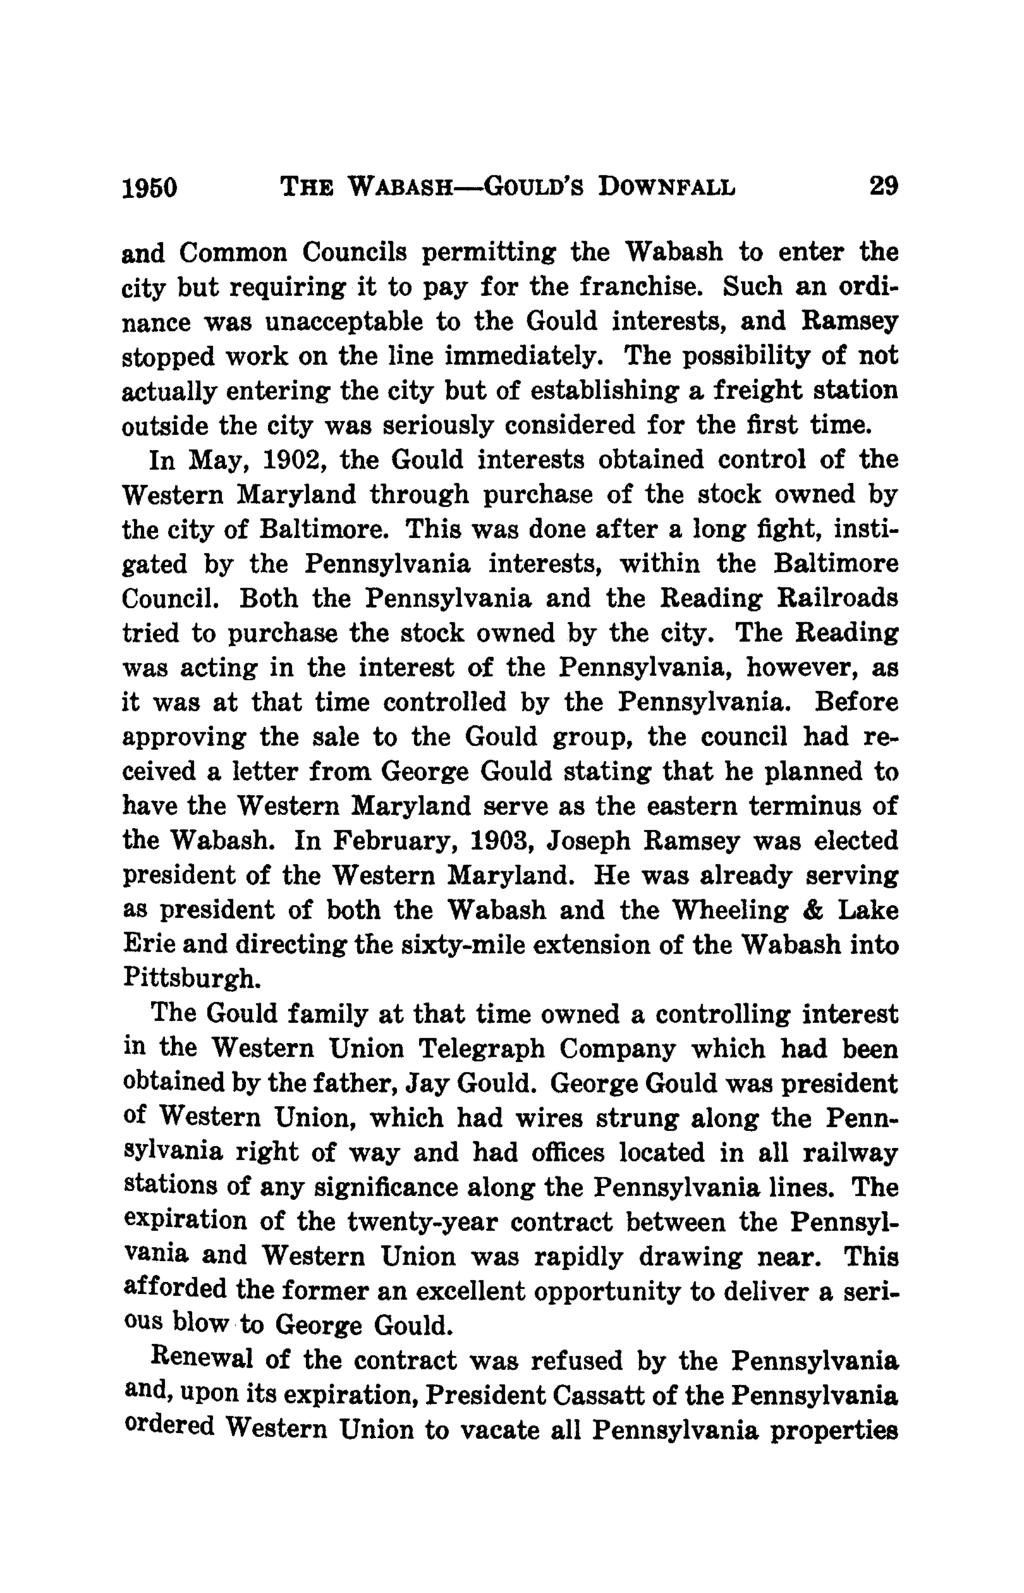 1950 The Wabash Gould's Downfall 29 and Common Councils permitting the Wabash to enter the city but requiring itto pay for the franchise.